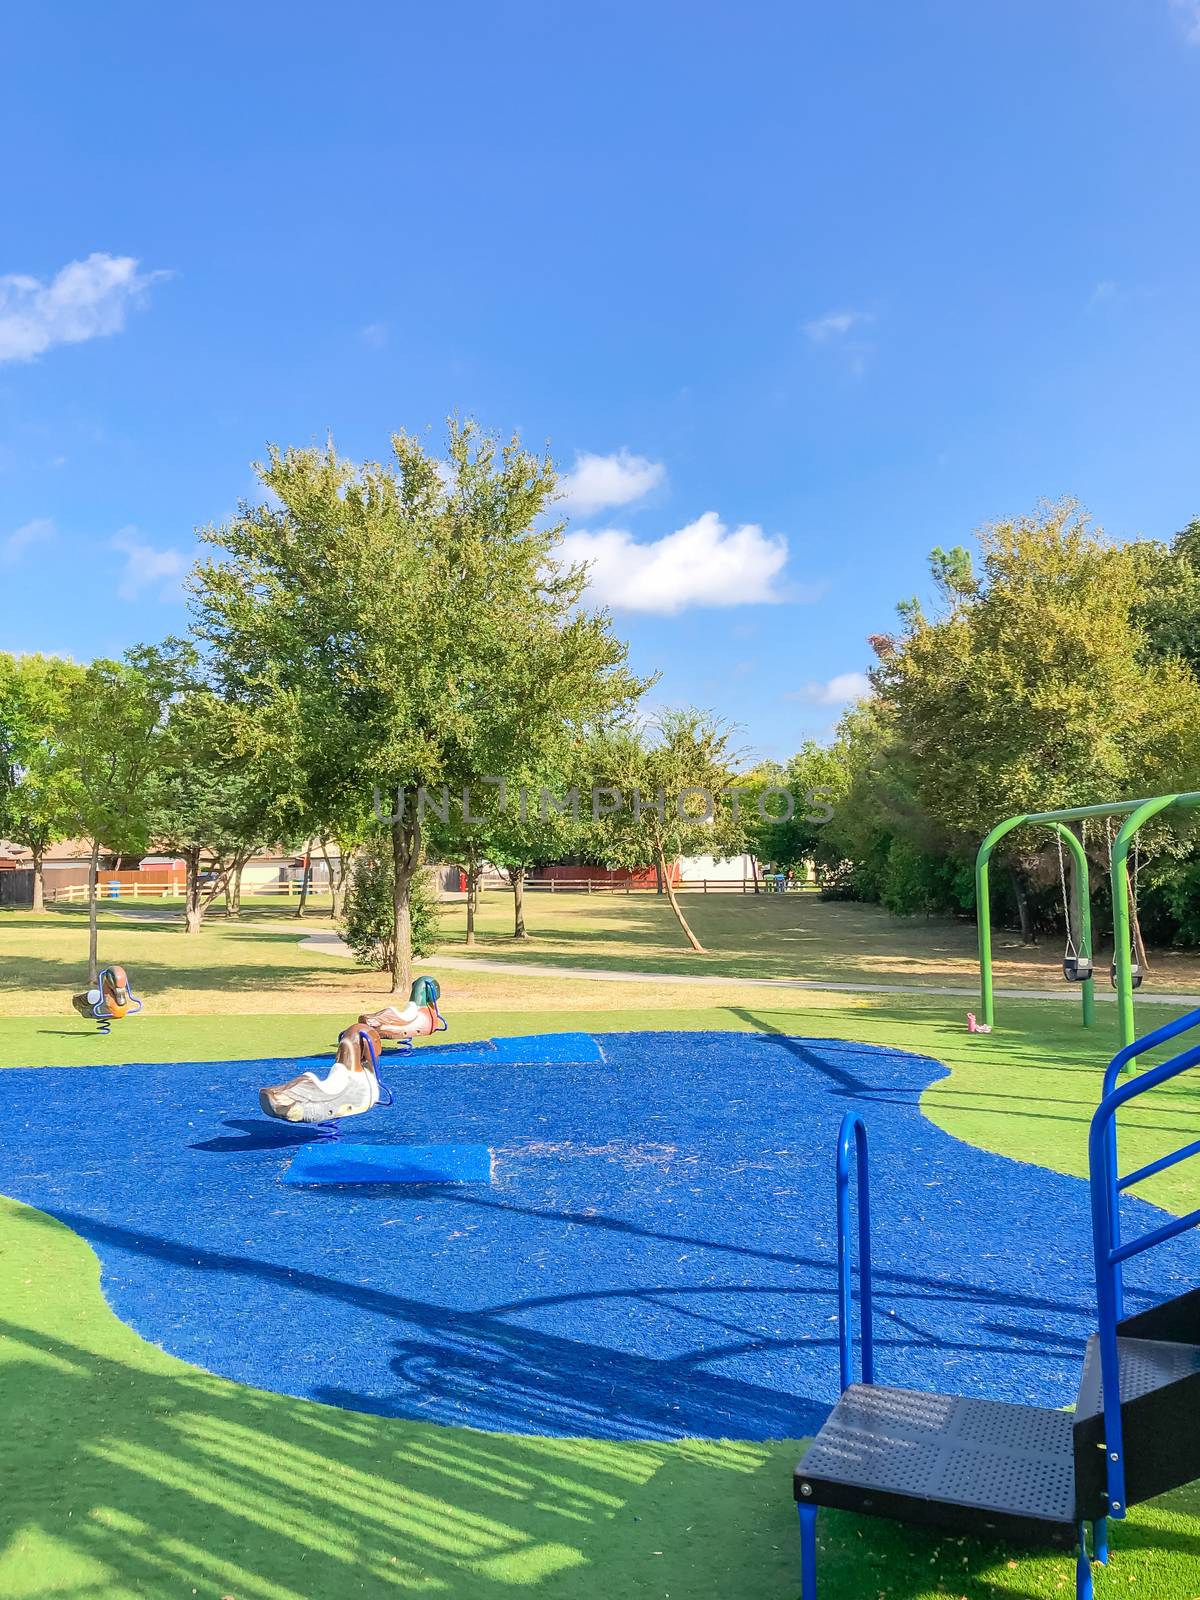 Large neighborhood playground with artificial grass in Flower Mound, Texas, America by trongnguyen